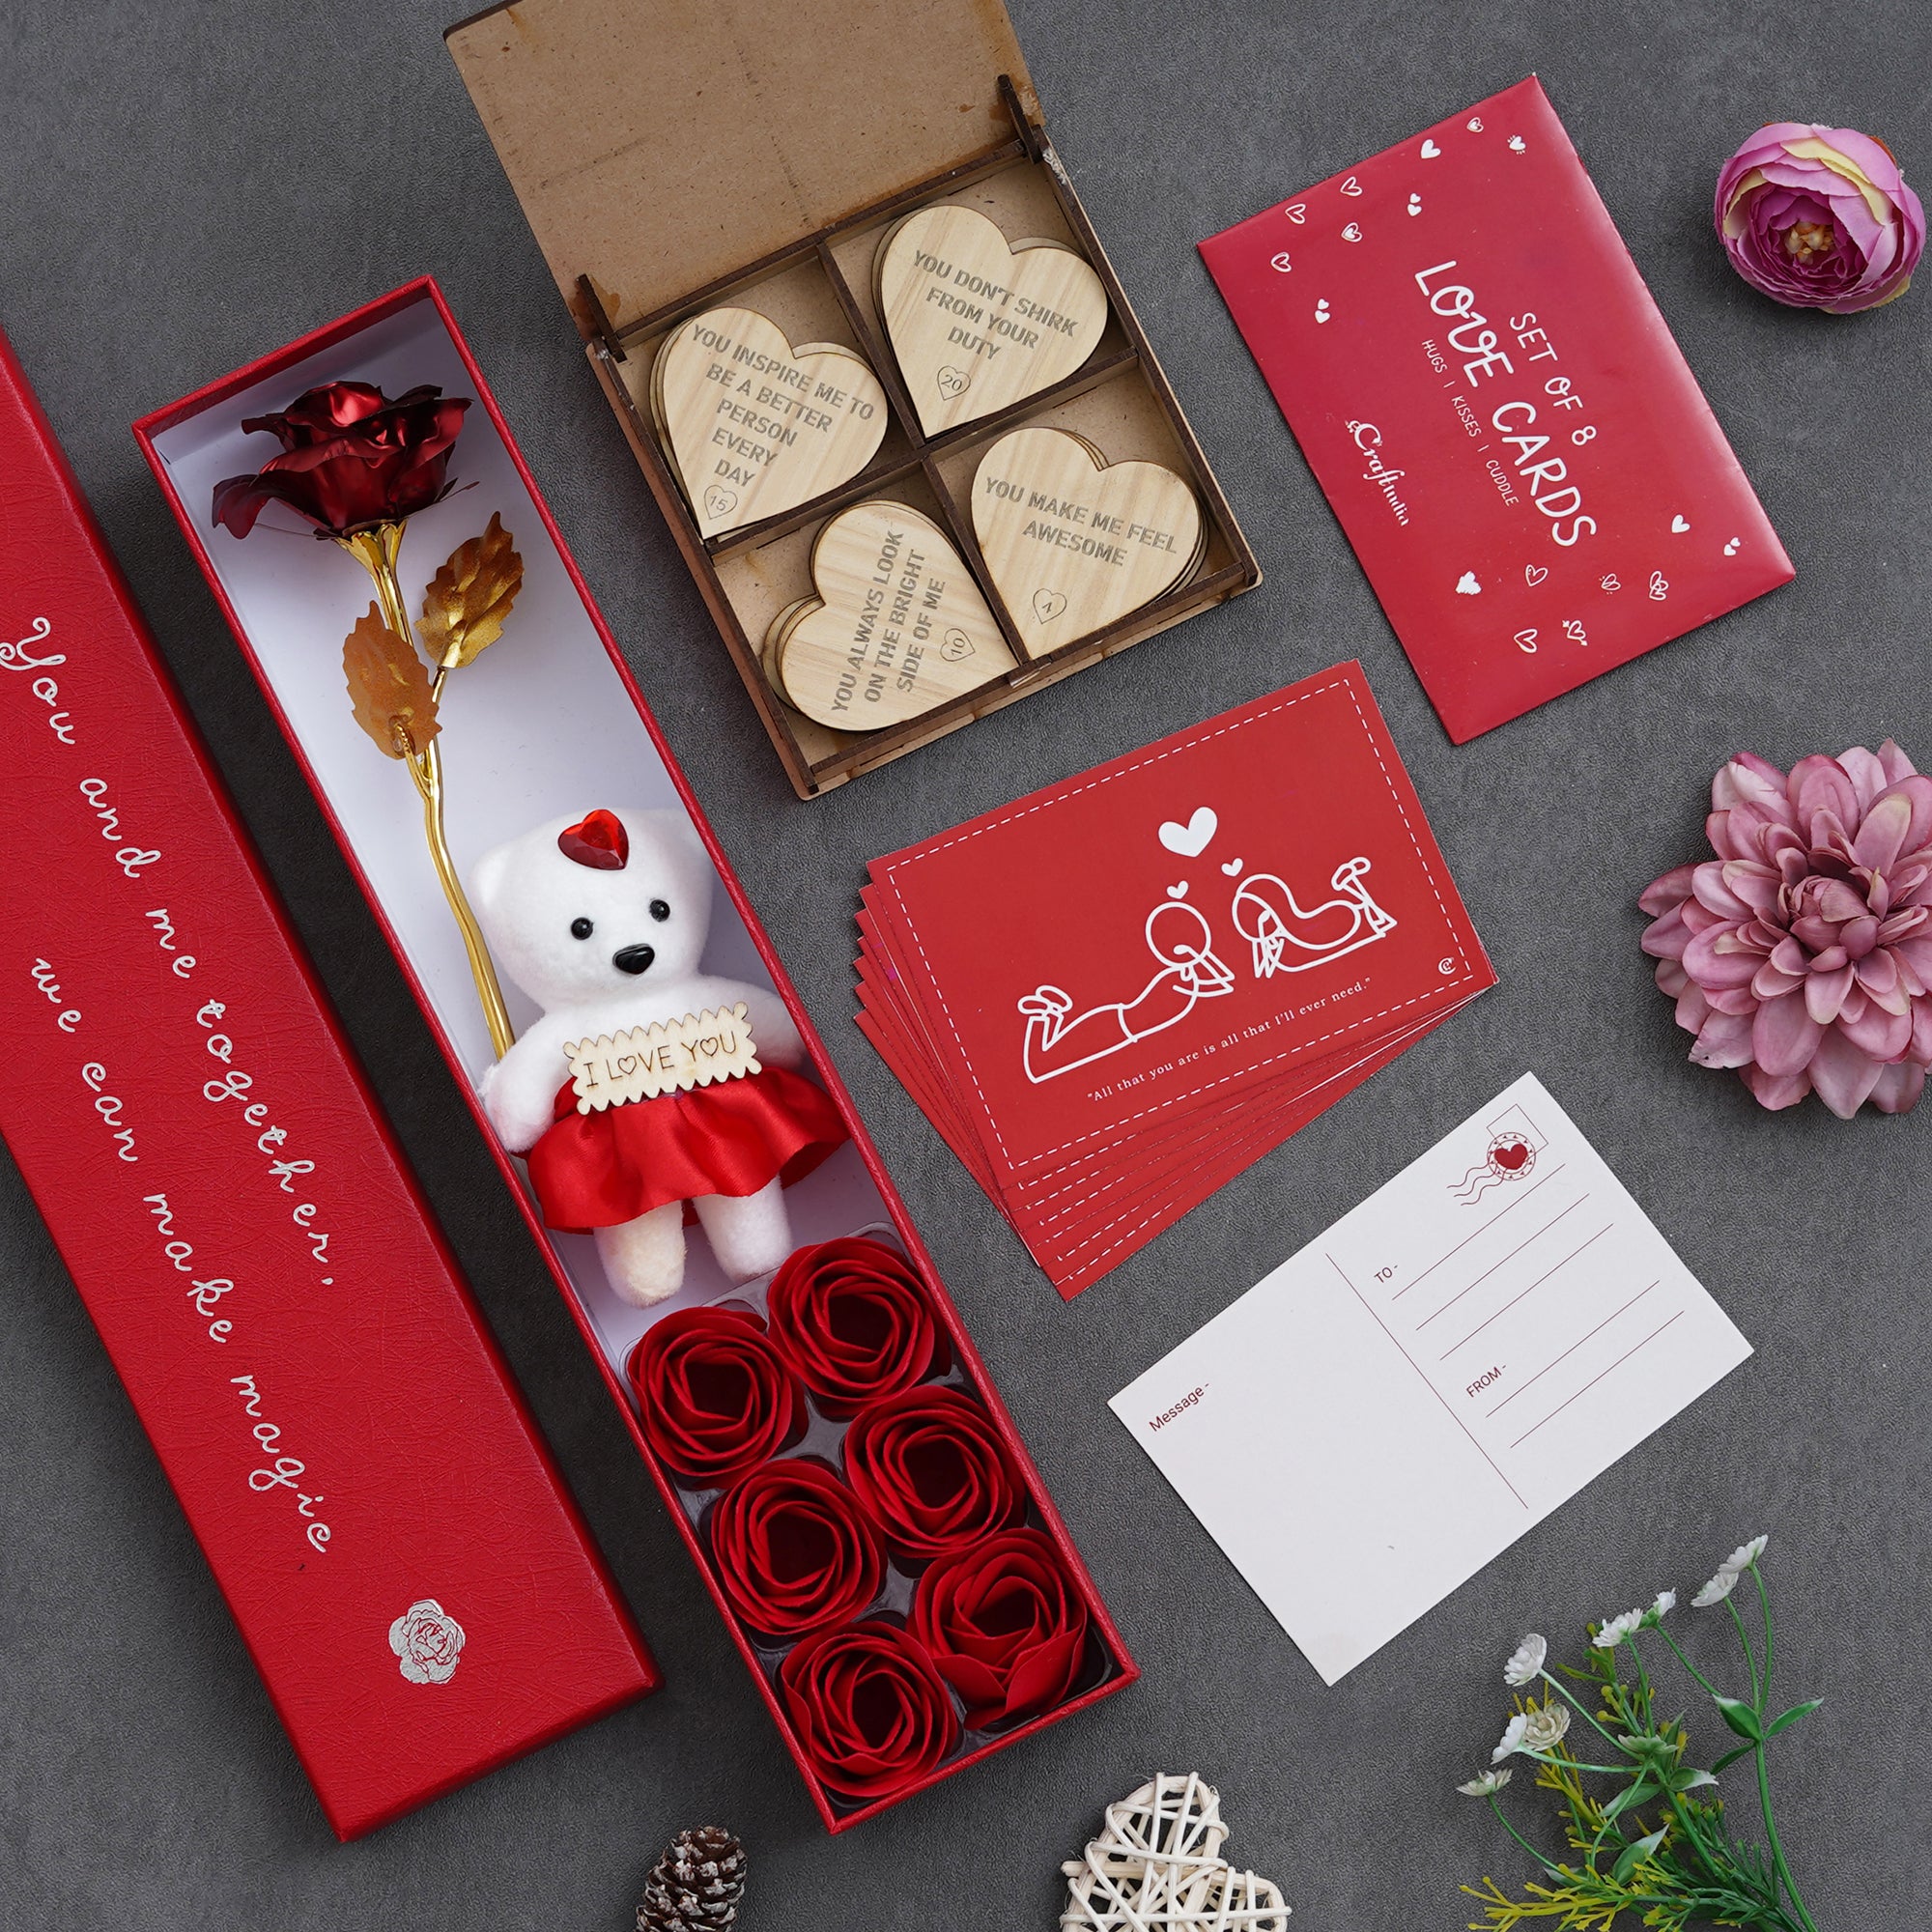 Valentine Combo of Pack of 8 Love Gift Cards, Red Gift Box with Teddy & Roses, "20 Reasons Why I Need You" Printed on Little Hearts Wooden Gift Set